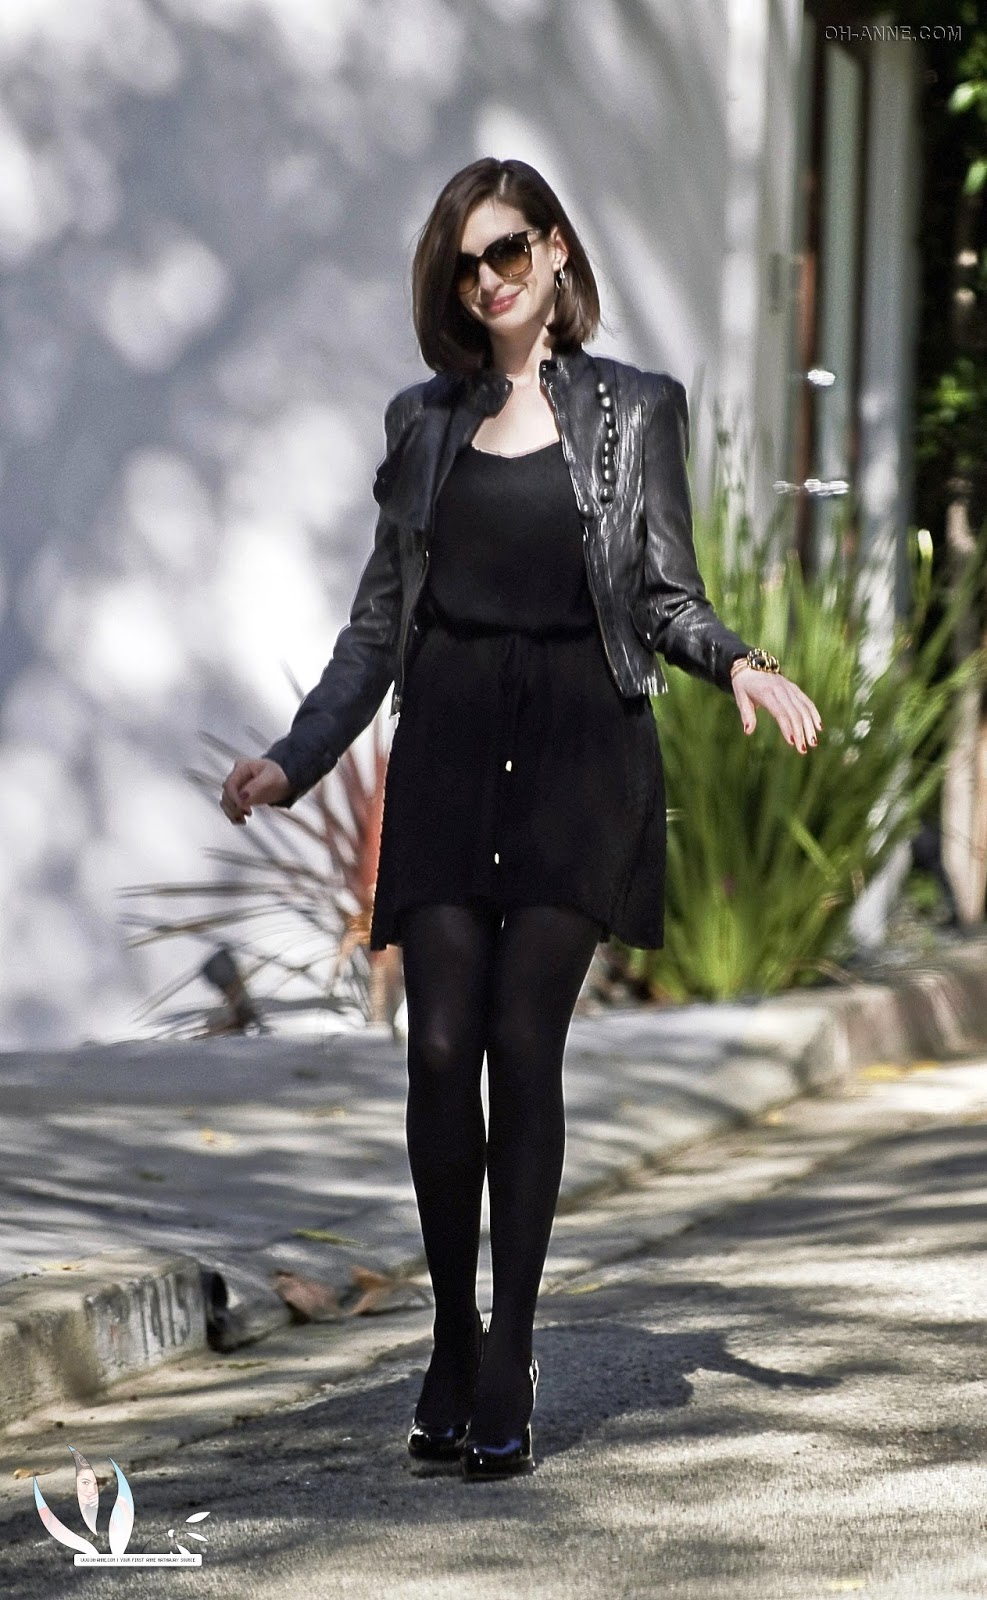 Anne Hathaway`s Legs and Feet in Tights 25 